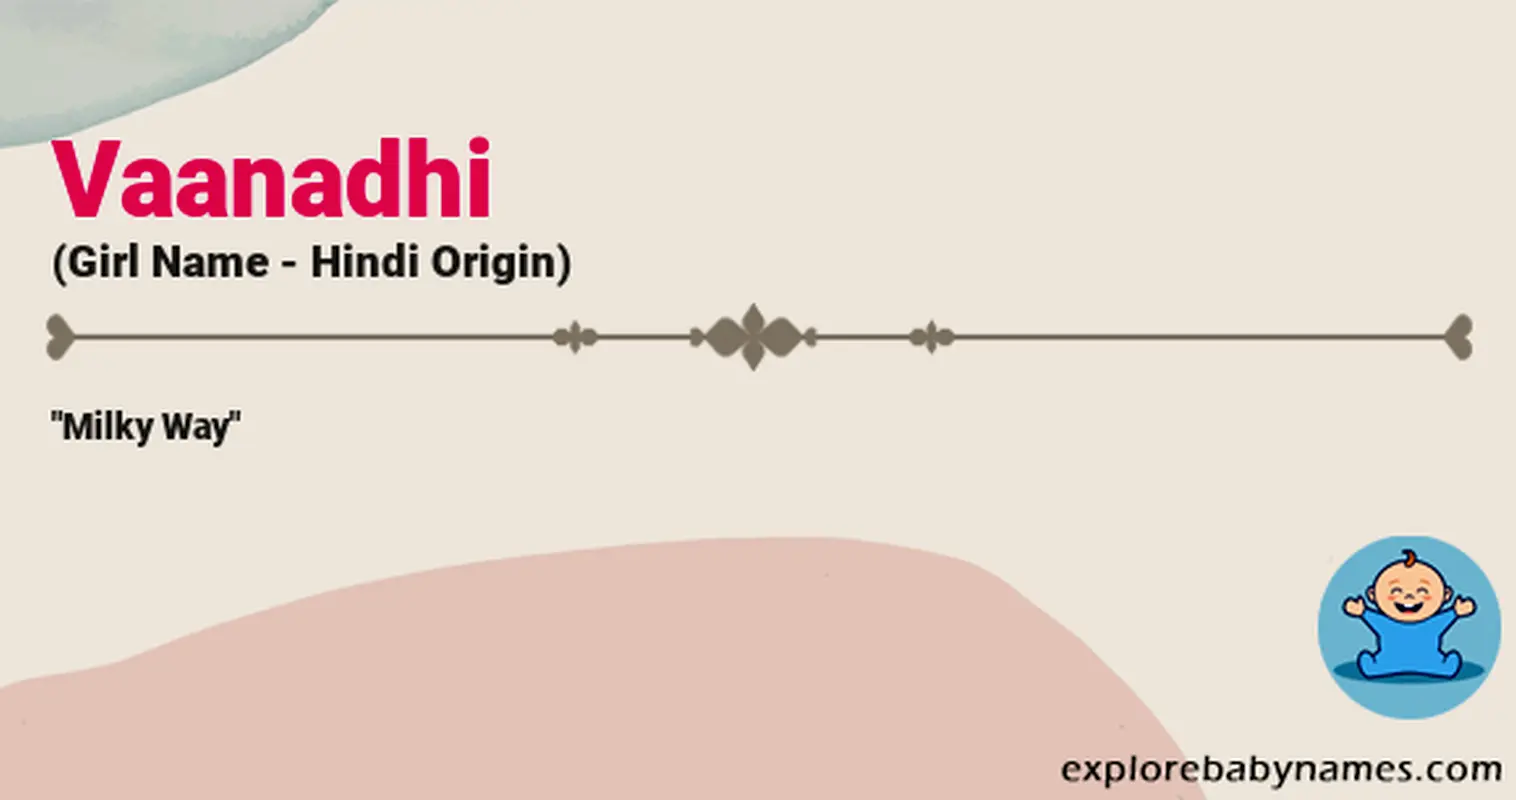 Meaning of Vaanadhi